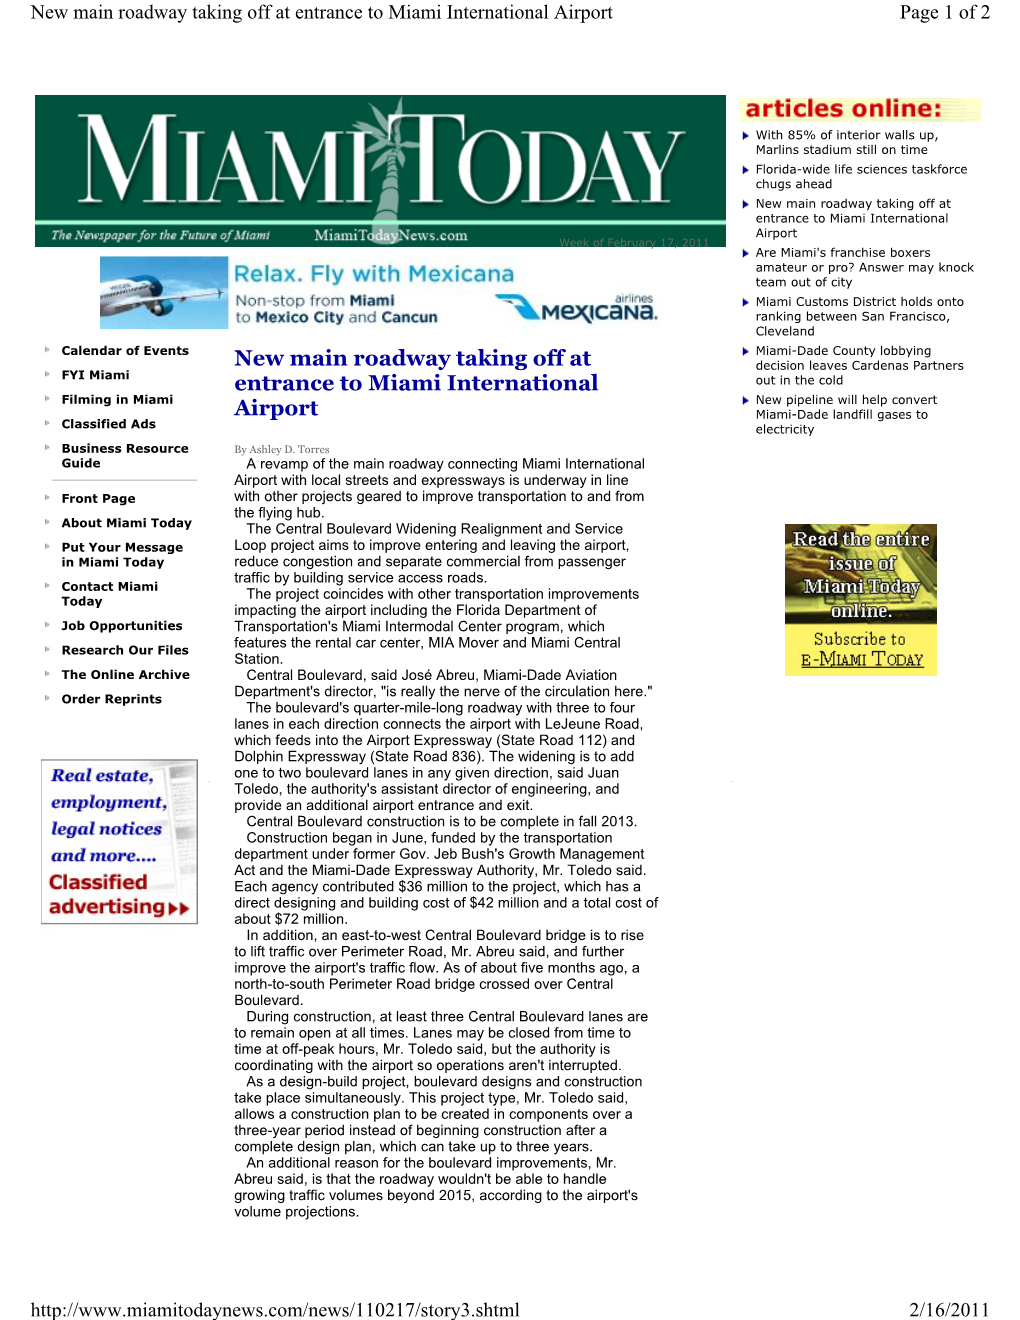 New Main Roadway Taking Off at Entrance to Miami International Airport Page 1 of 2